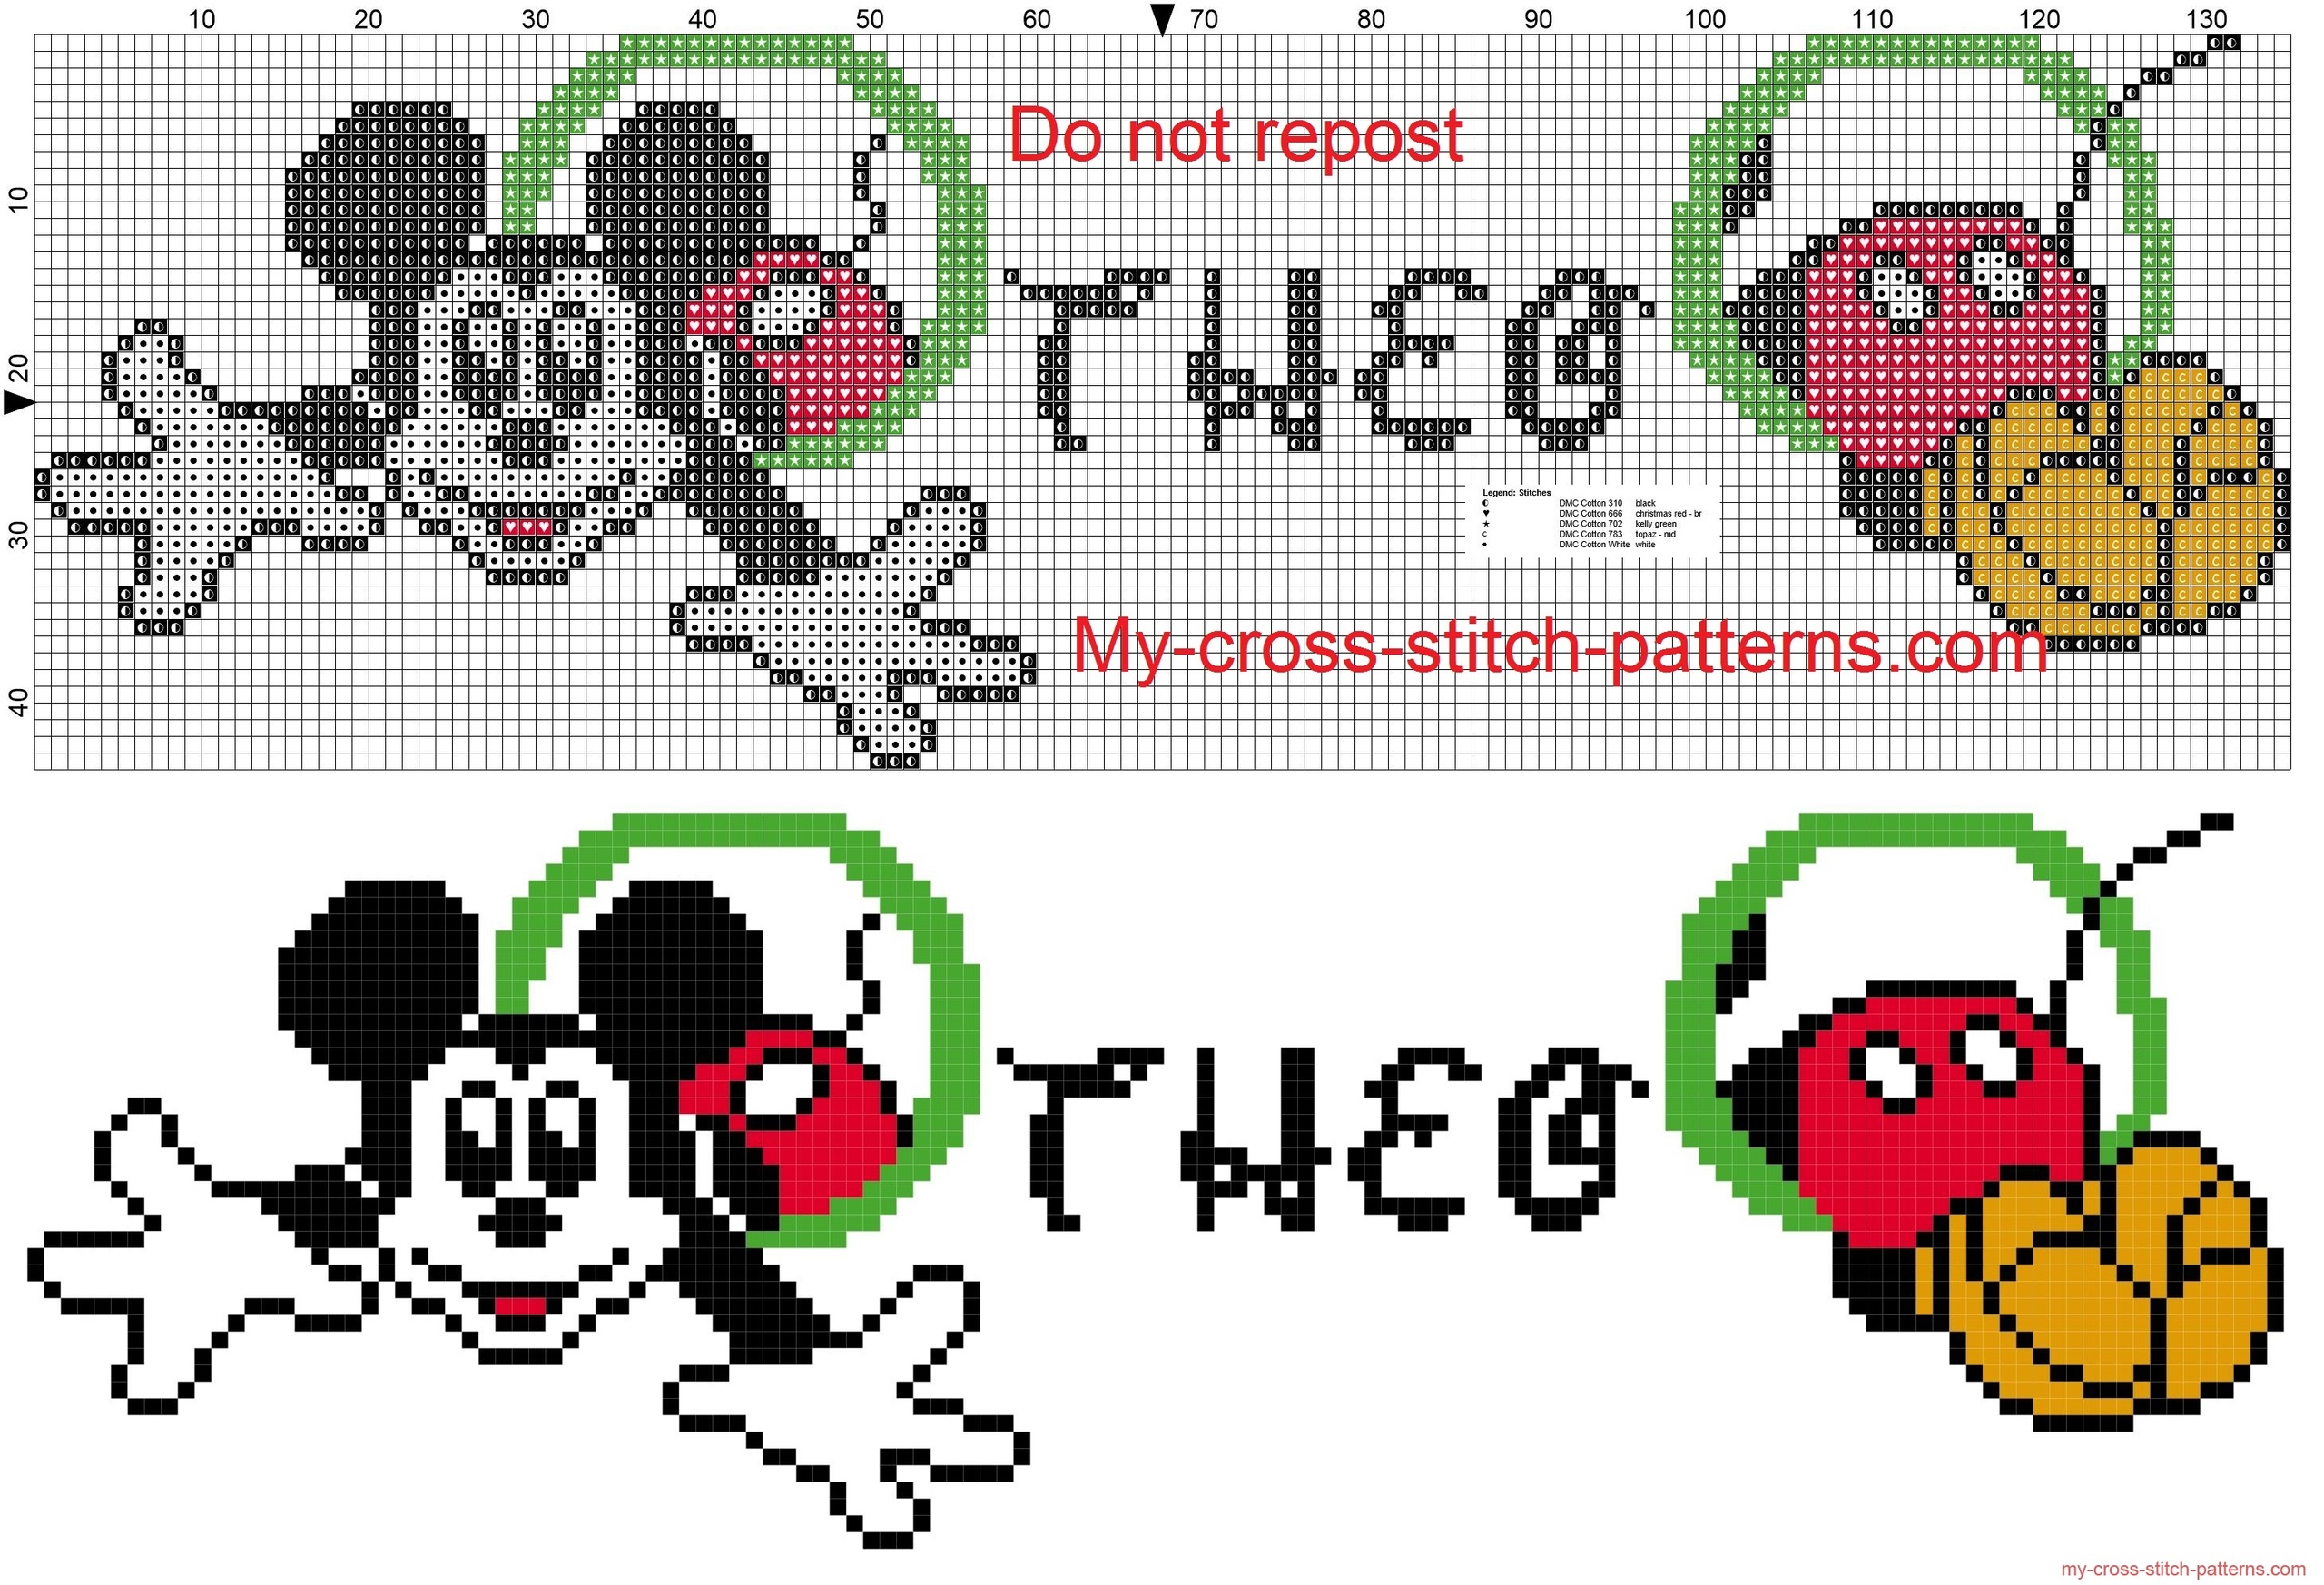 theo_name_whit_mickey_mouse_cross_stitch_patterns_free